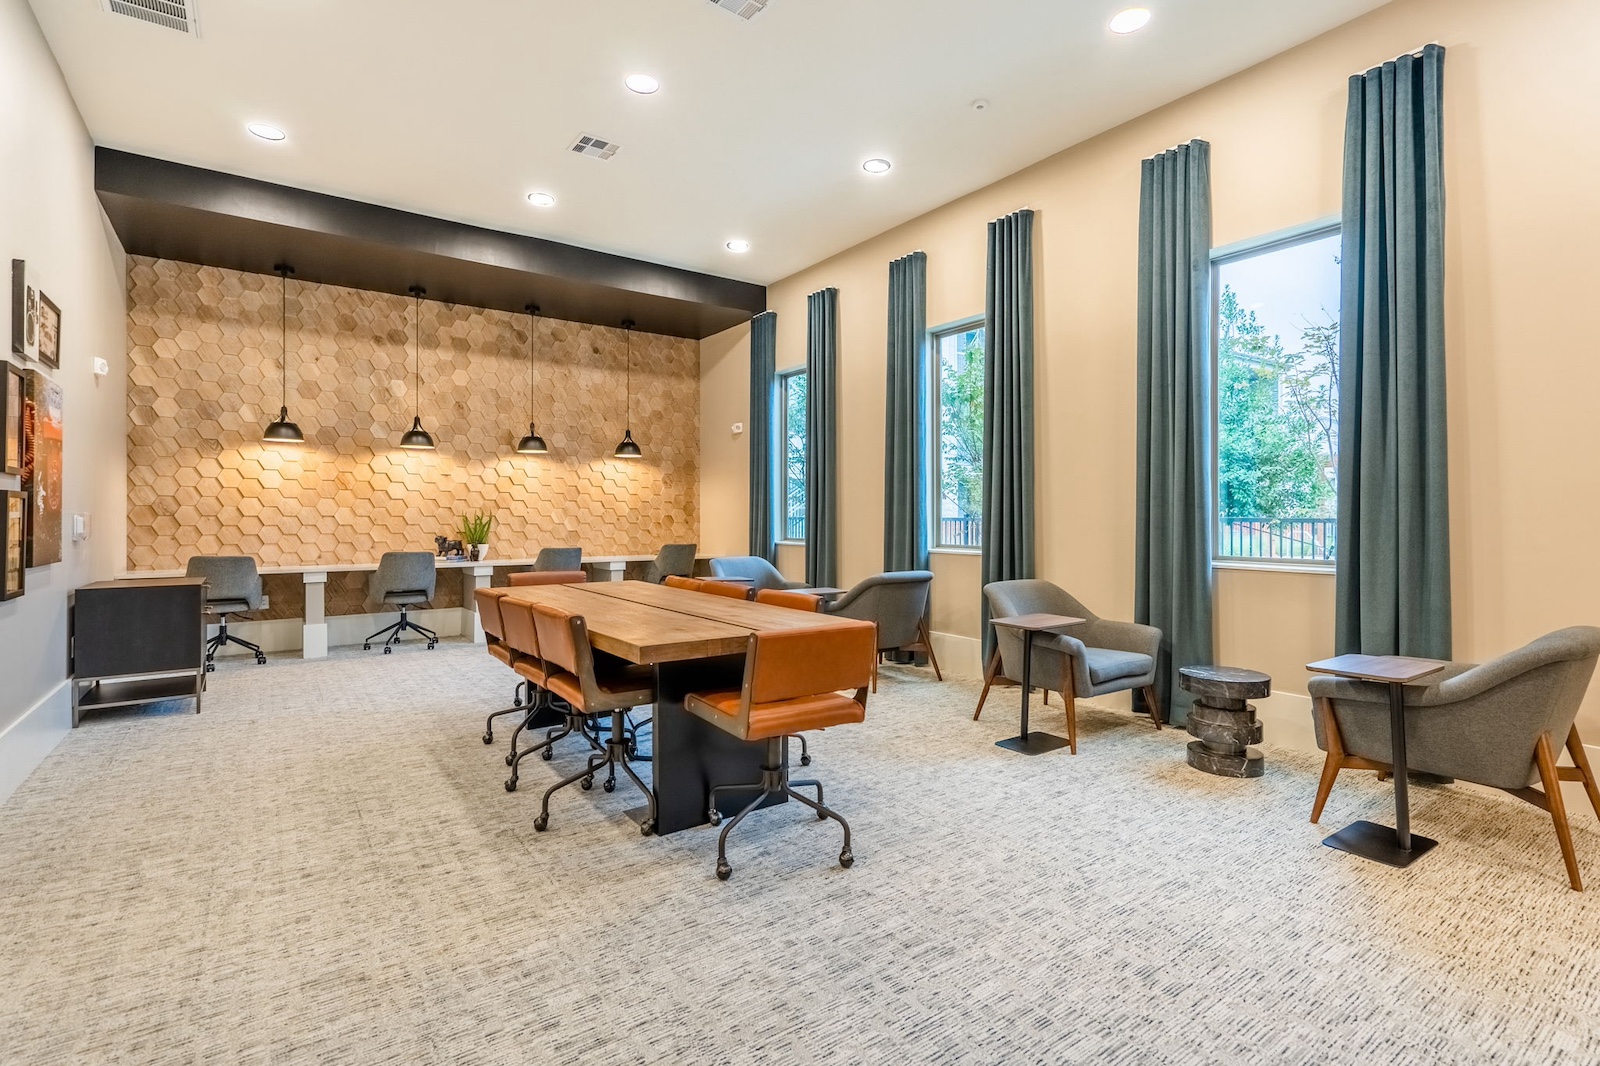 Work-Well space with a large conference room table and ample seating at our Cypress, TX apartments. Amenities